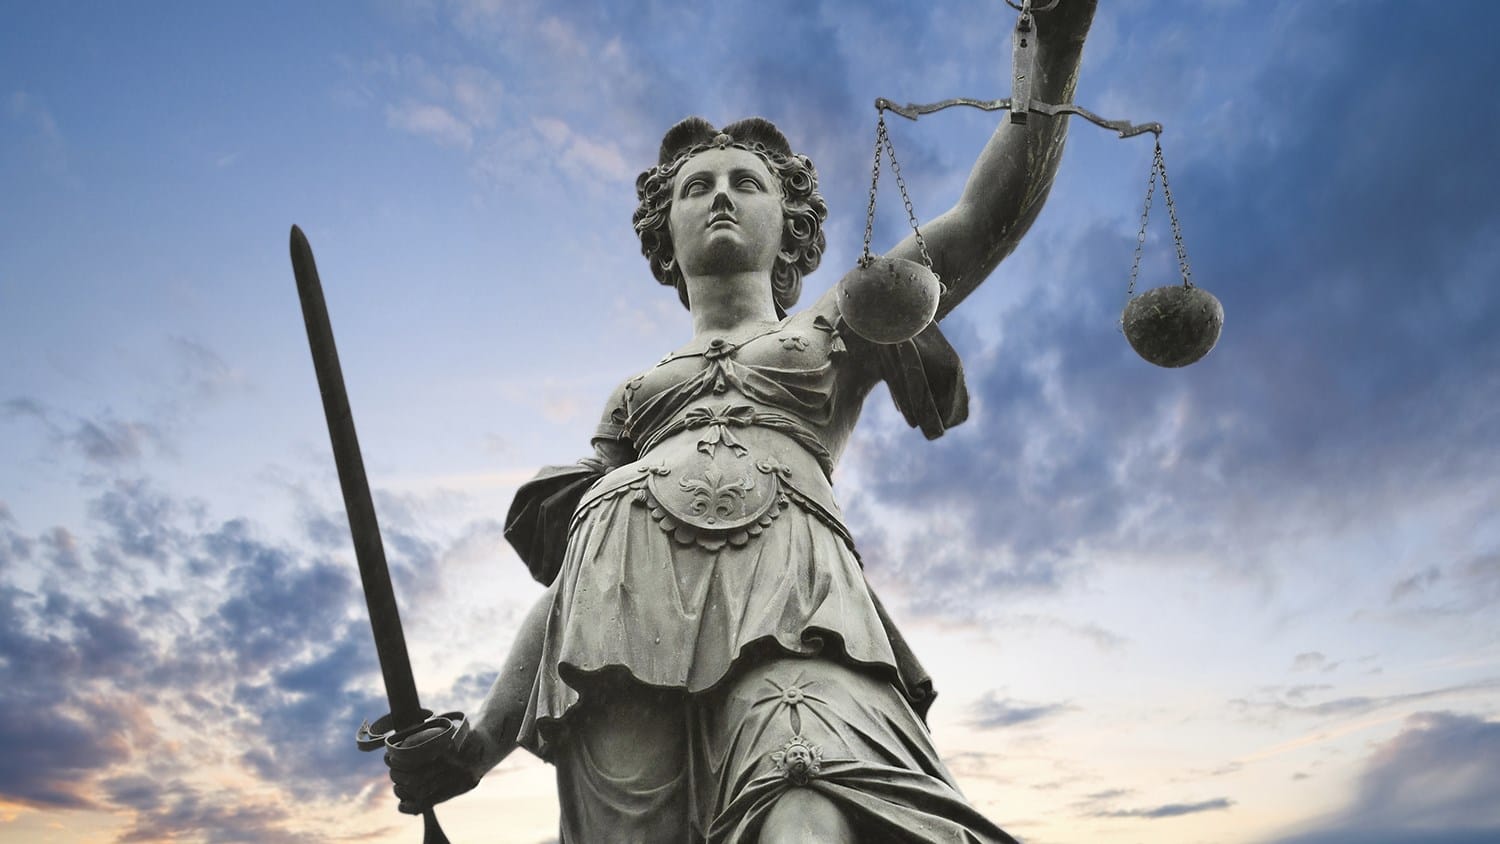 A statue of Lady Justice holding a sword and scales, symbolizing justice and strength.